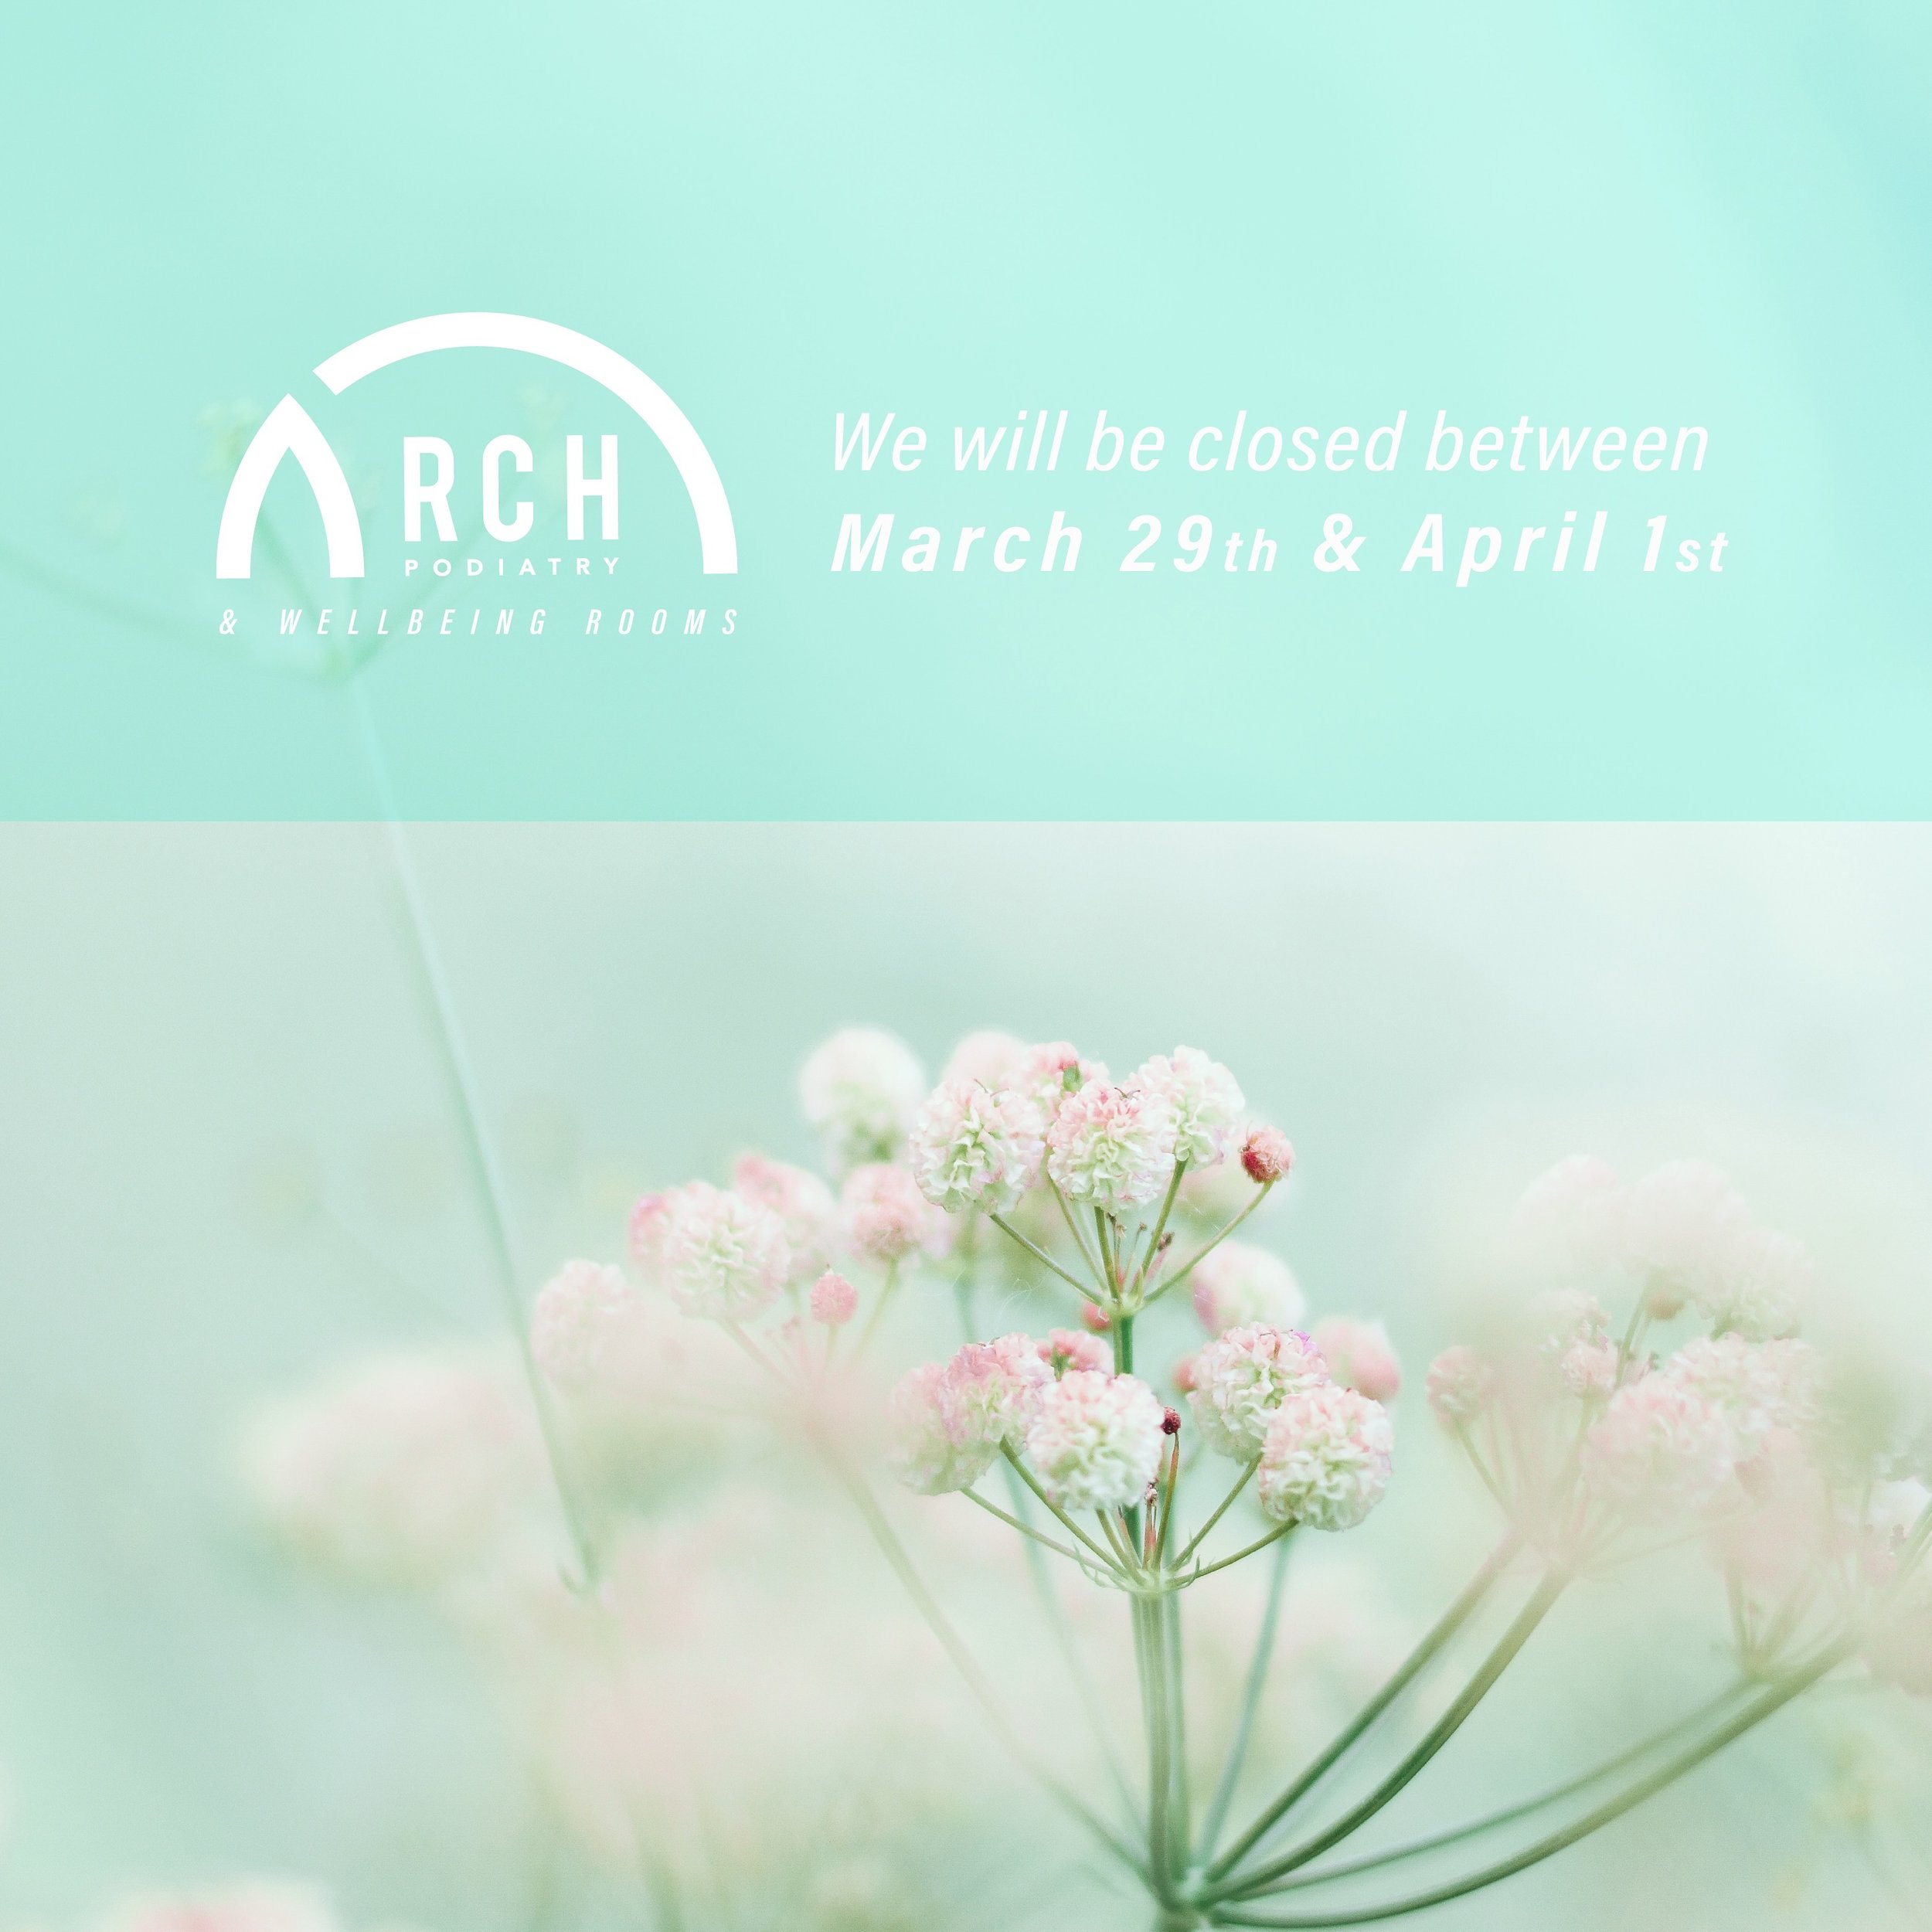 We will be closed over the Easter weekend! ✨🥚
.
We are open tomorrow (Thursday) but will then be back open on Tuesday 2nd of April! ✨ 
.
Happy Easter to all our clients 🐣
.
.
☎️ 01273 567881
🌎www.archpodiatry.co.uk
📧 info@archpodiatry.co.uk 
.
.
